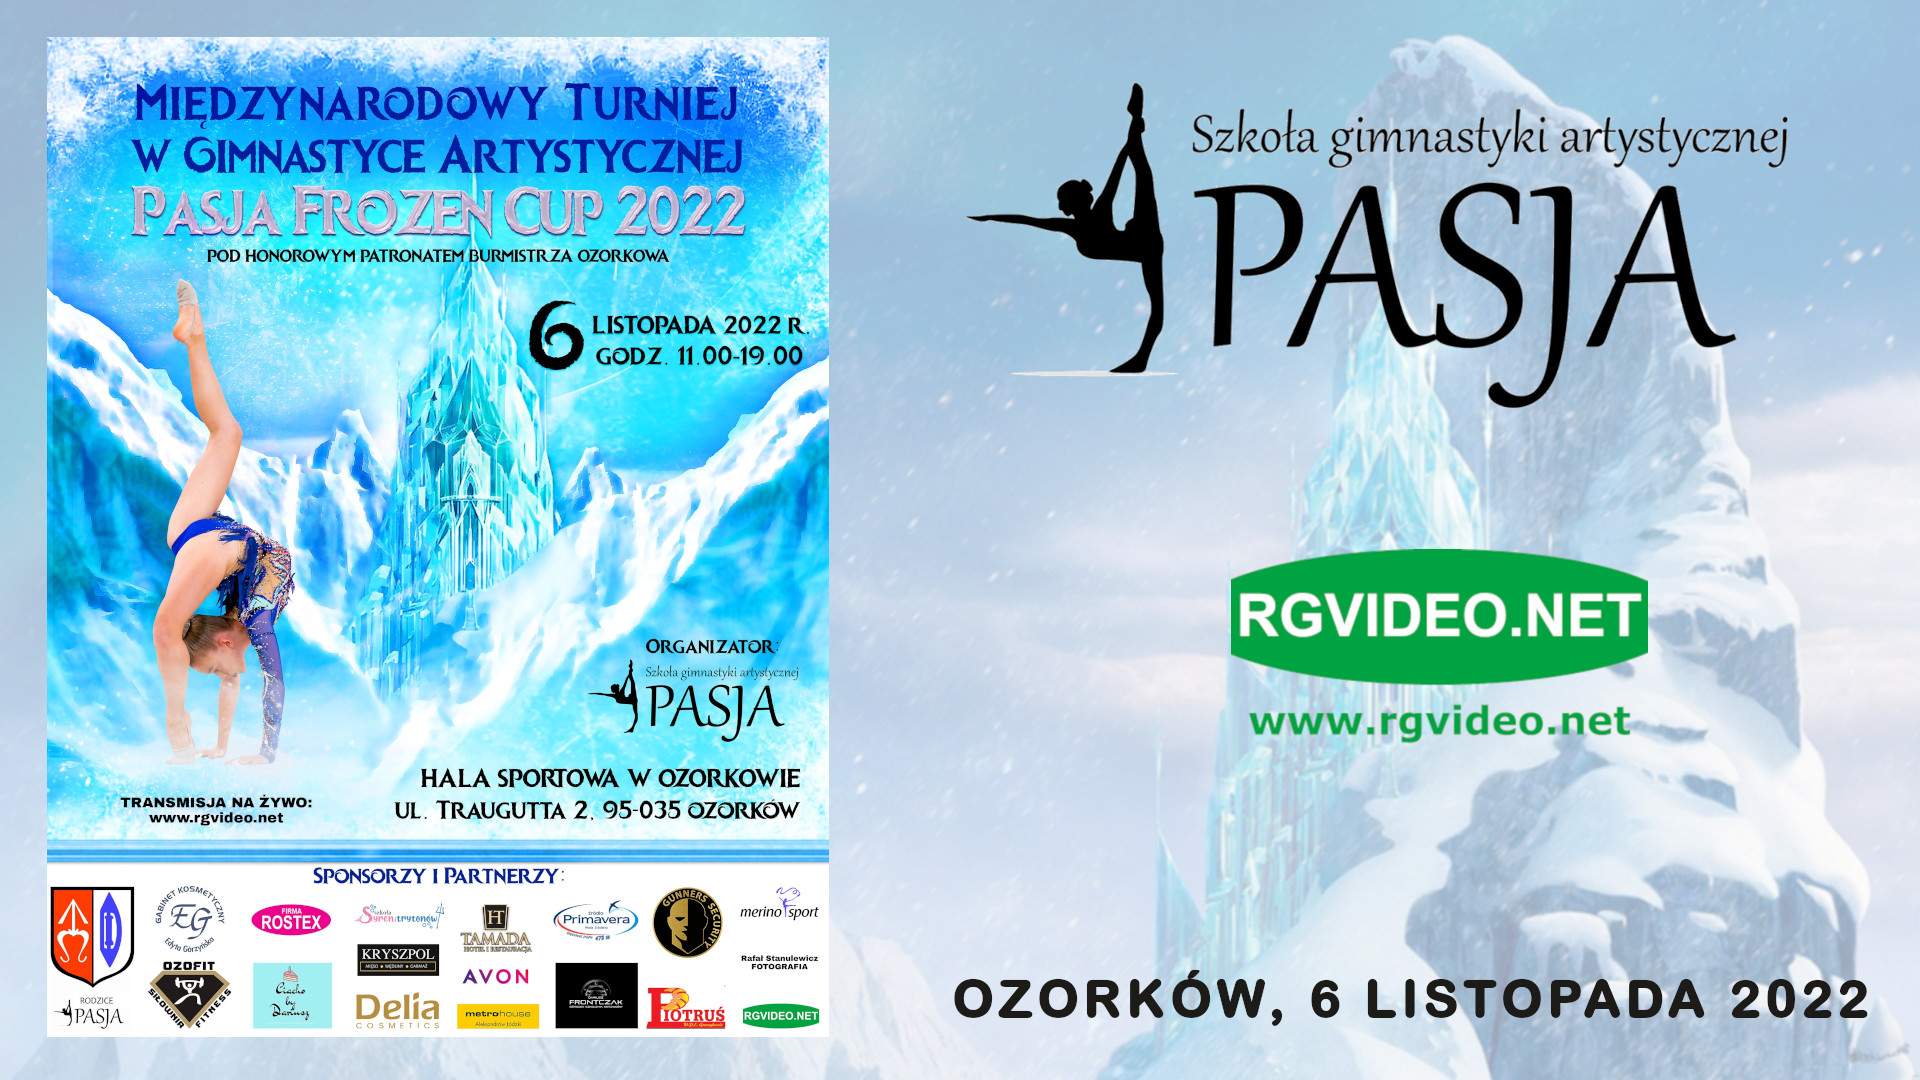 VIDEO - PASJA FROZEN CUP 2022